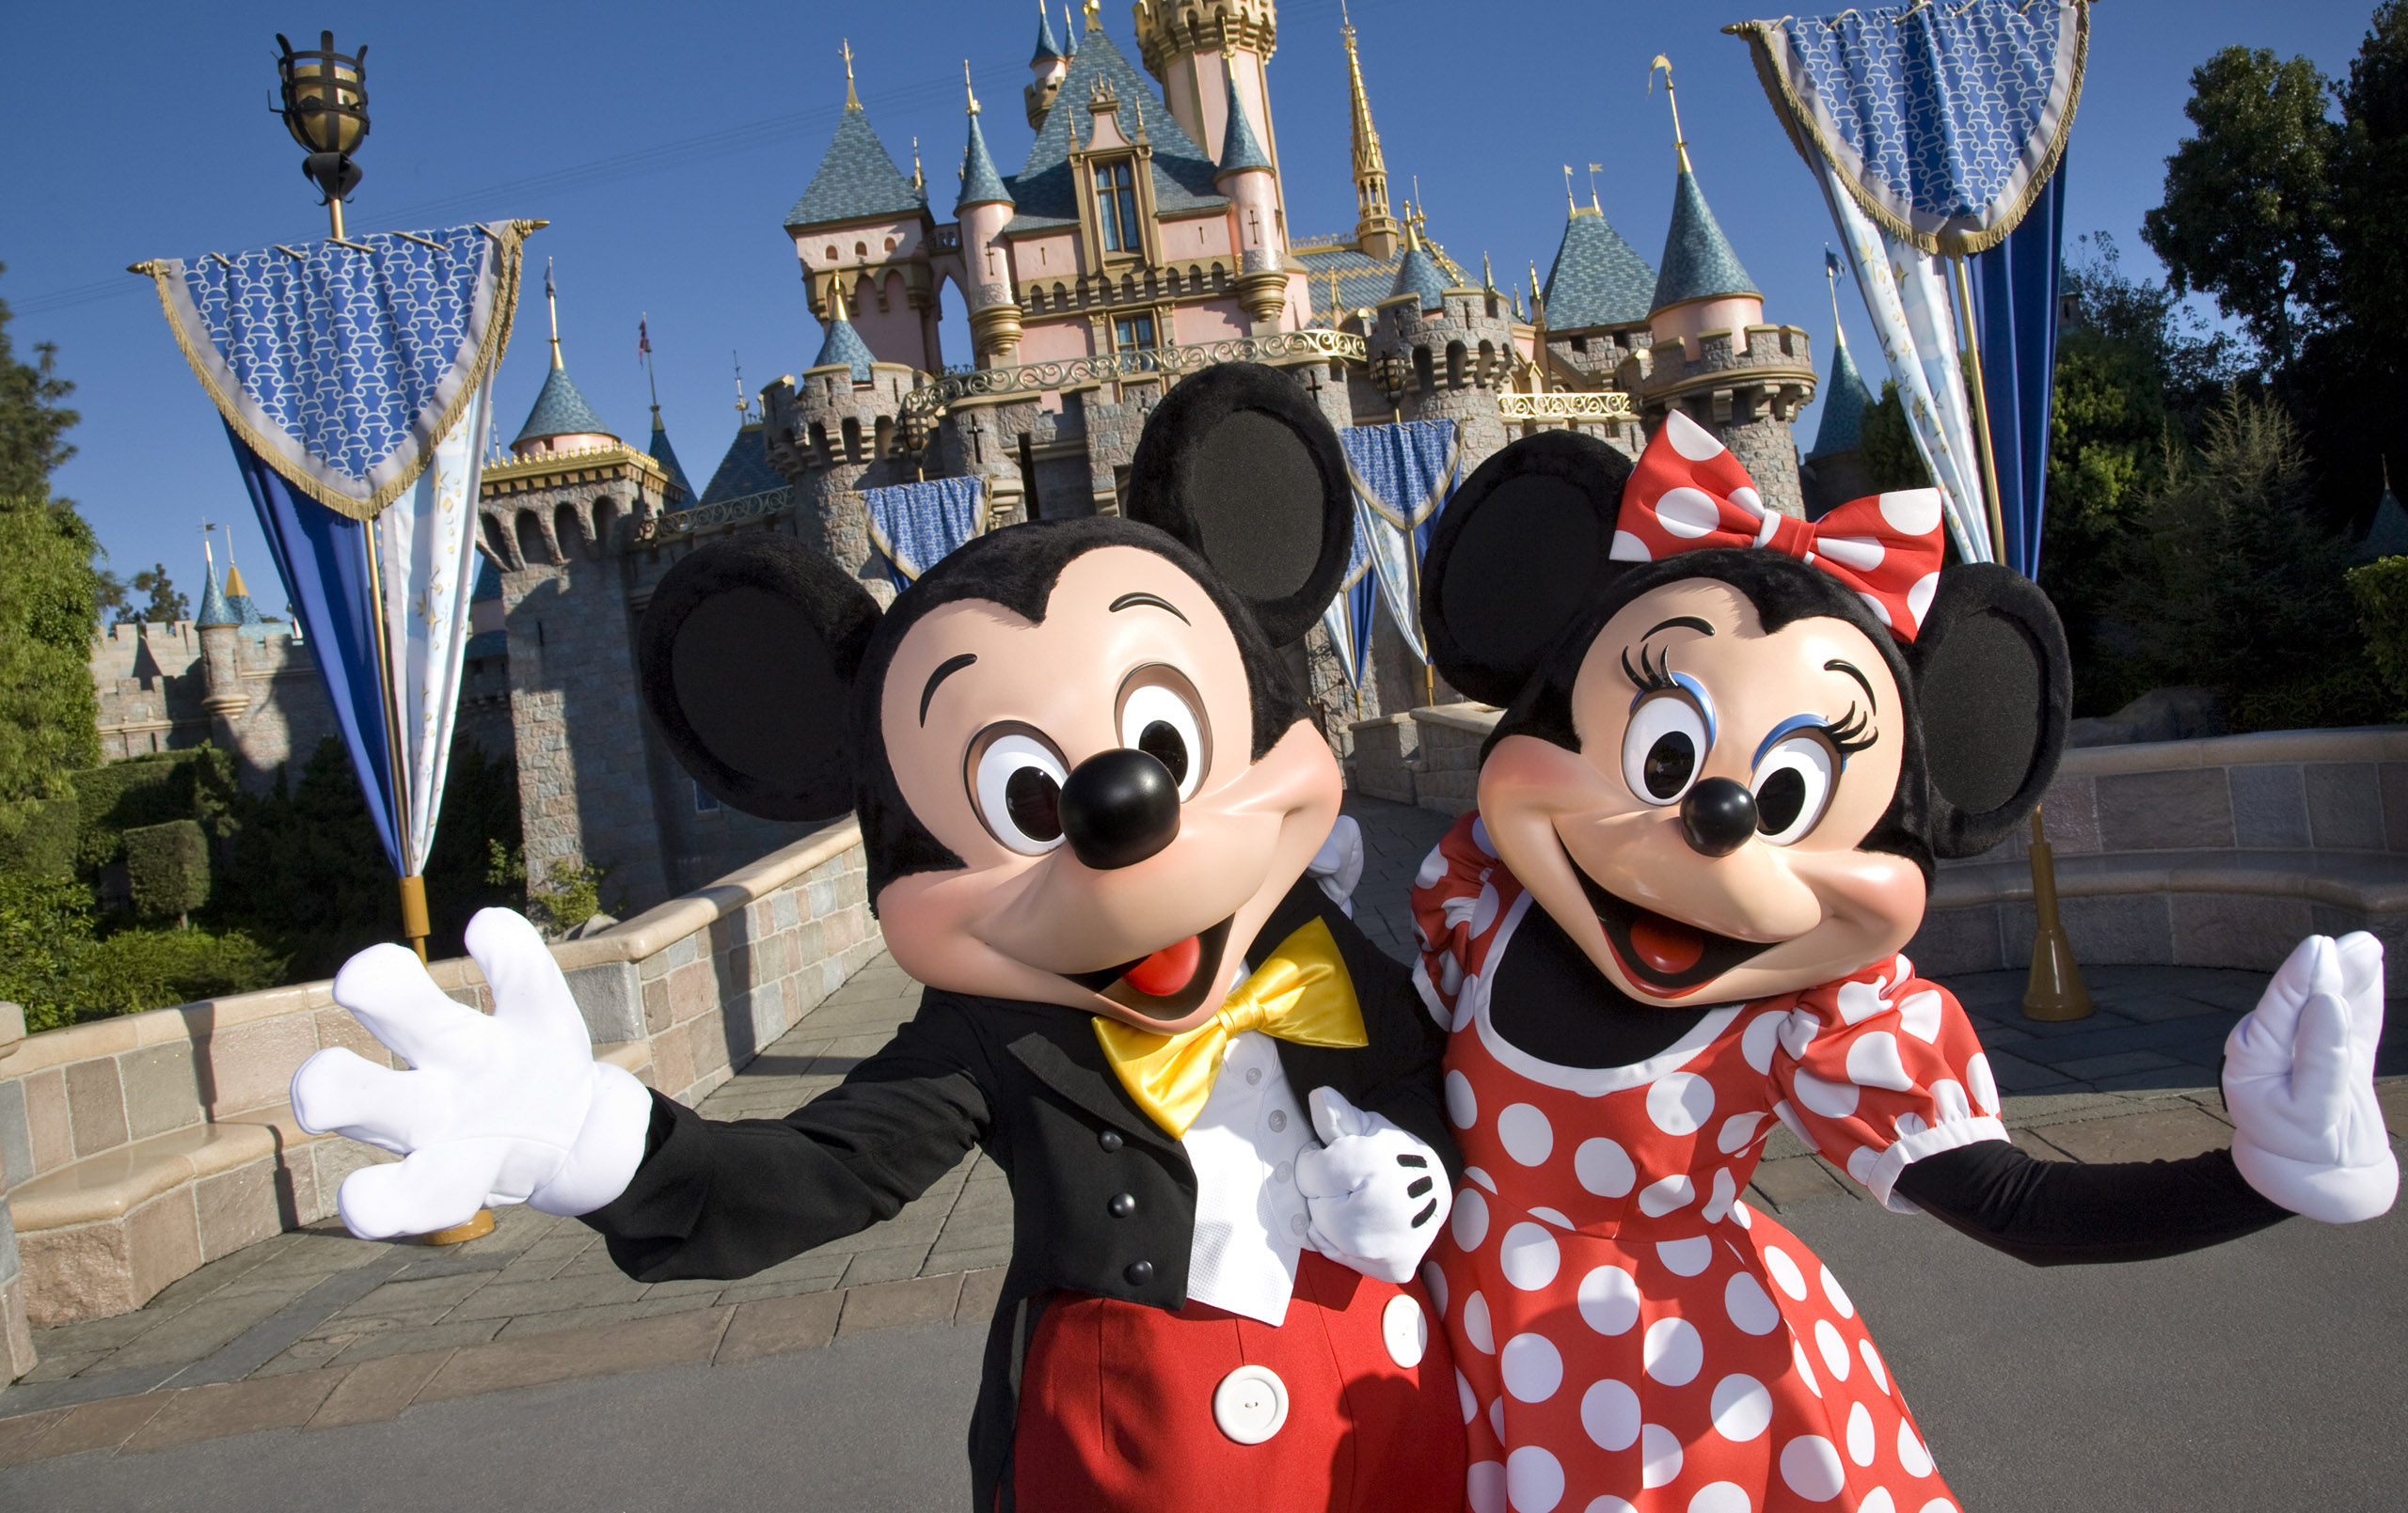 DISCOUNTED DISNEY TICKETS AVAILABLE FOR KAR ANAHEIM FINALS!